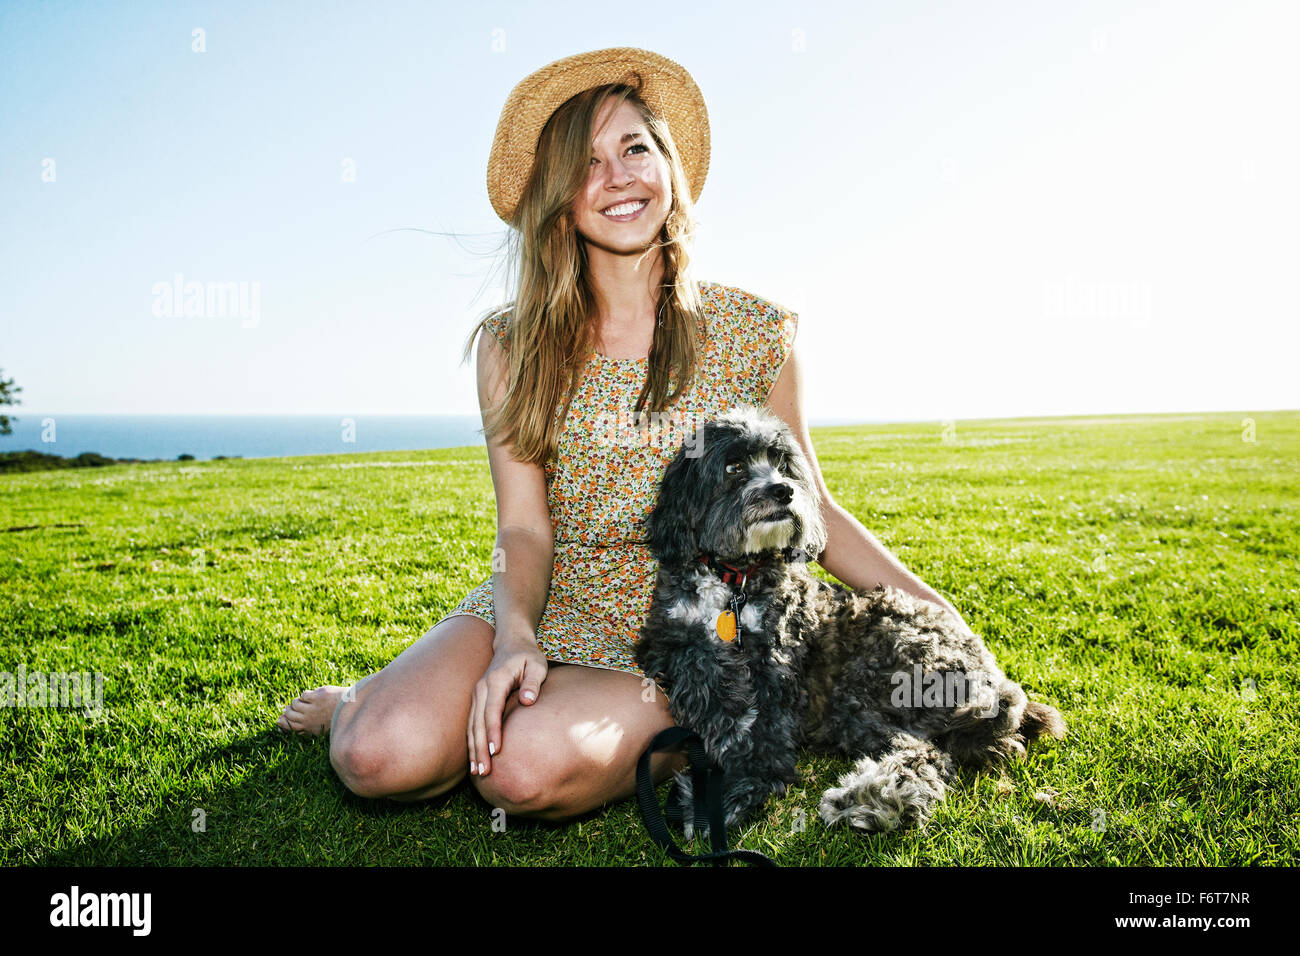 Caucasian woman sitting in field with dog Stock Photo